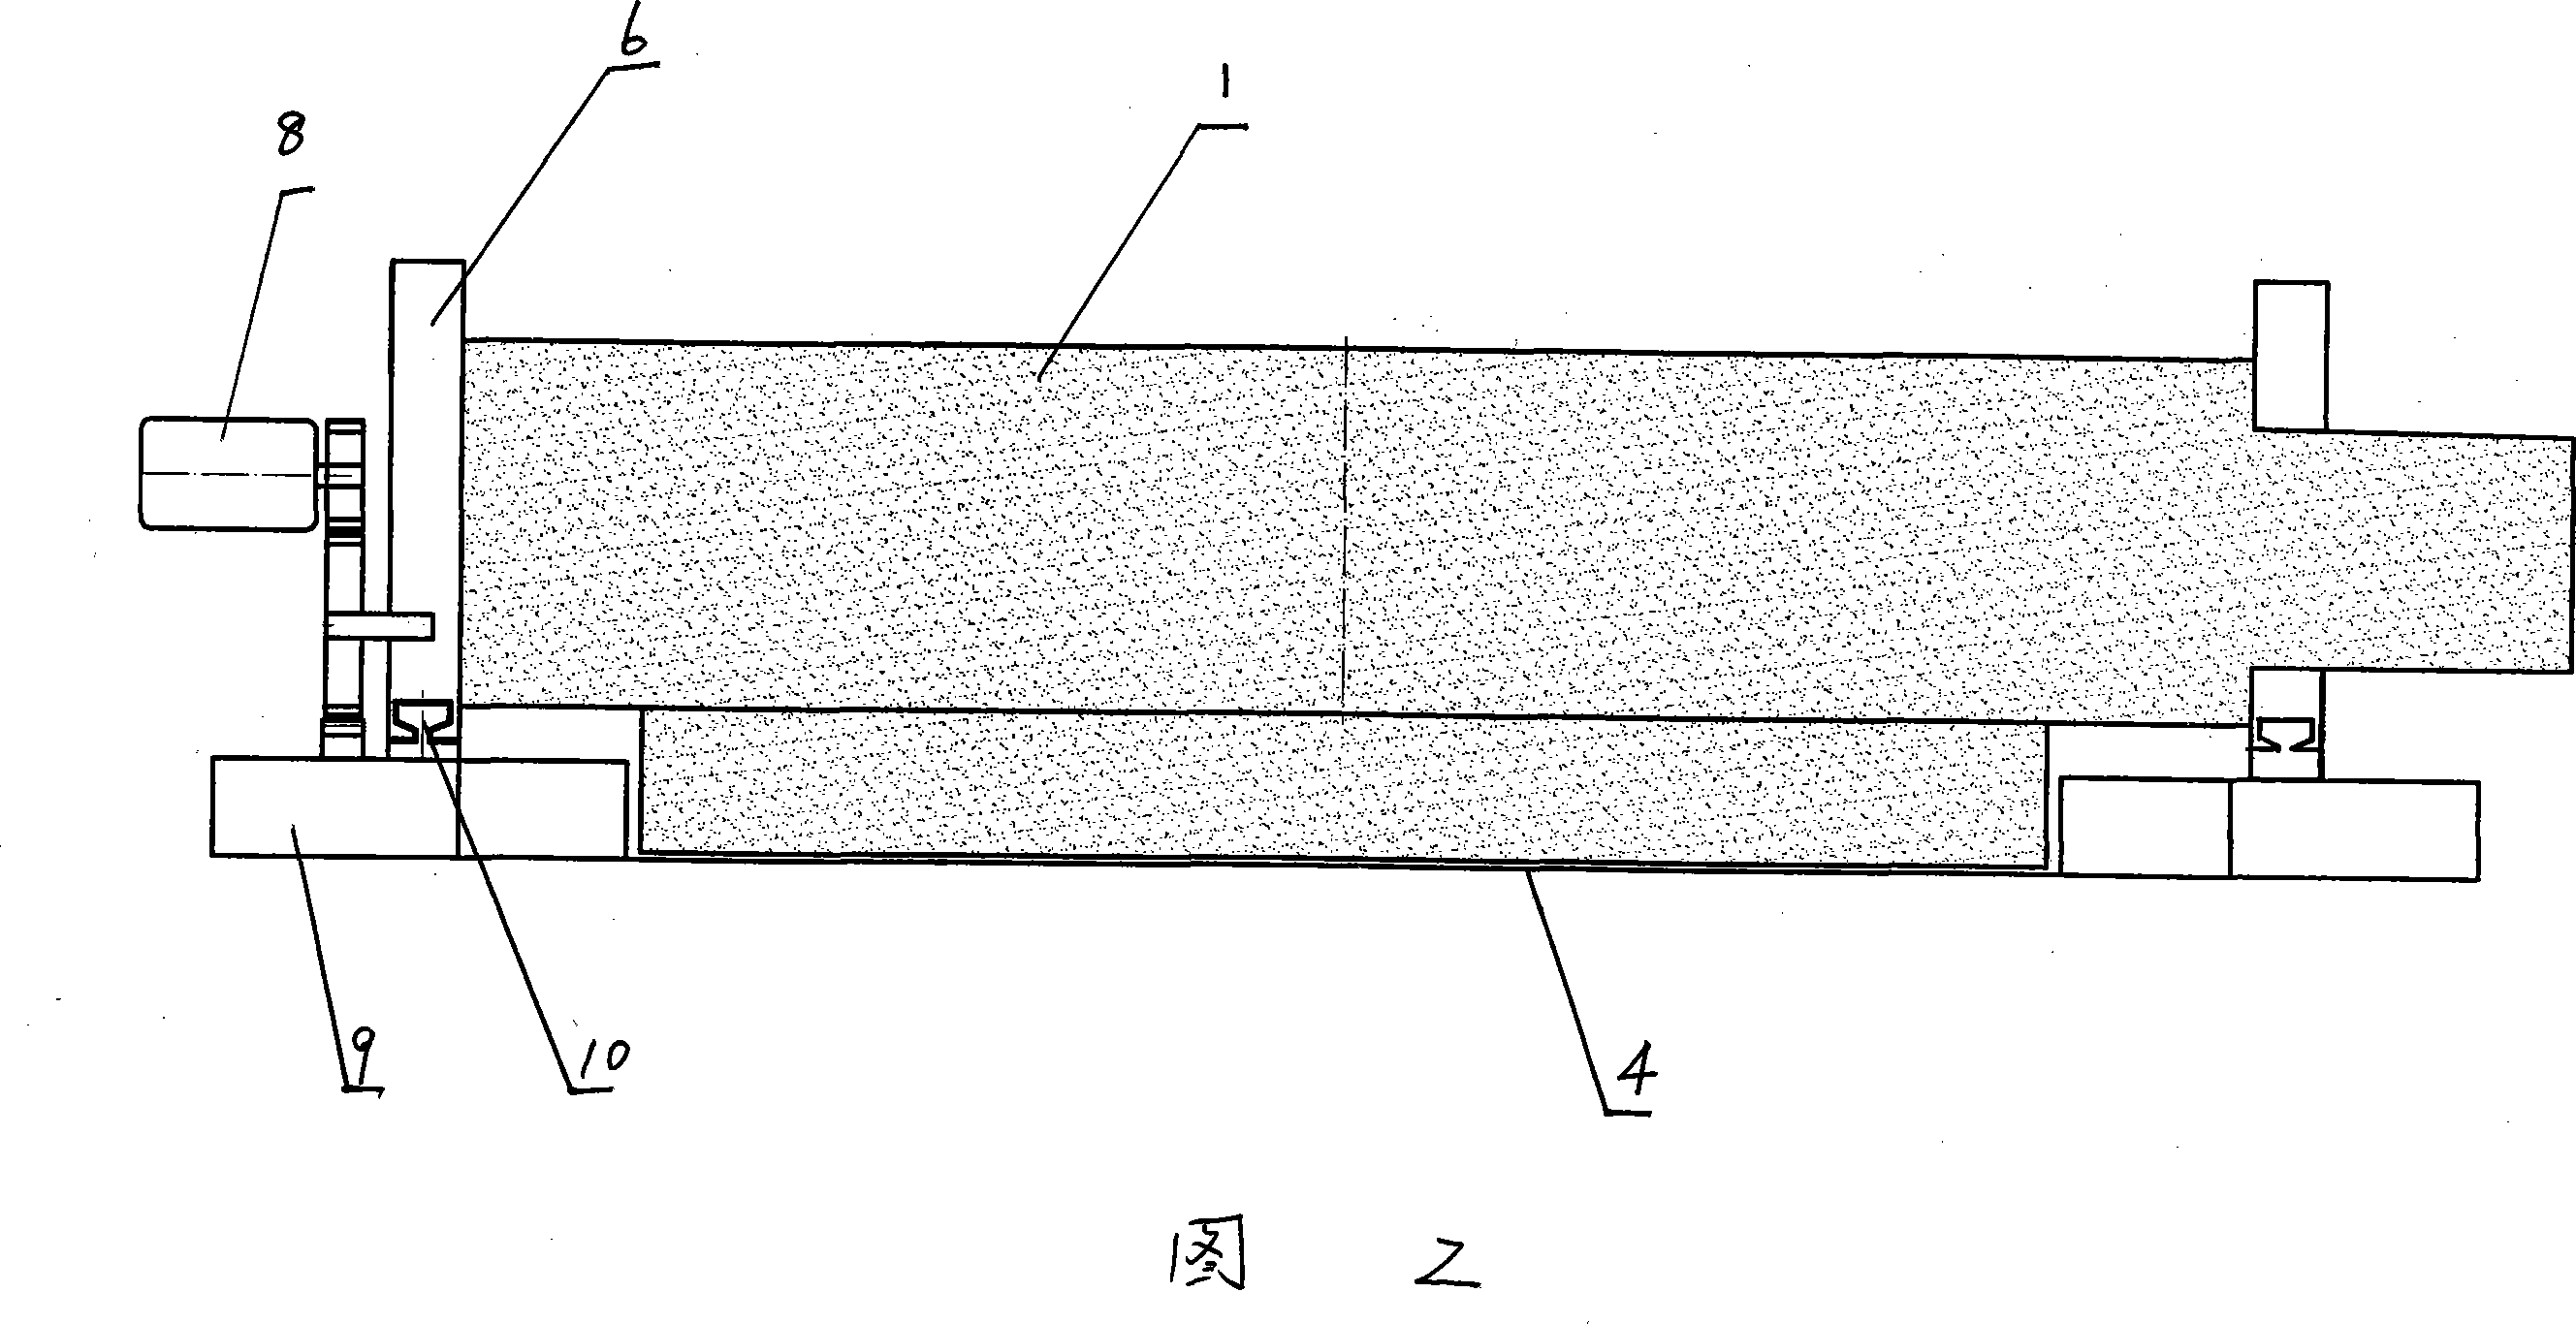 Fabric dyeing and printing device